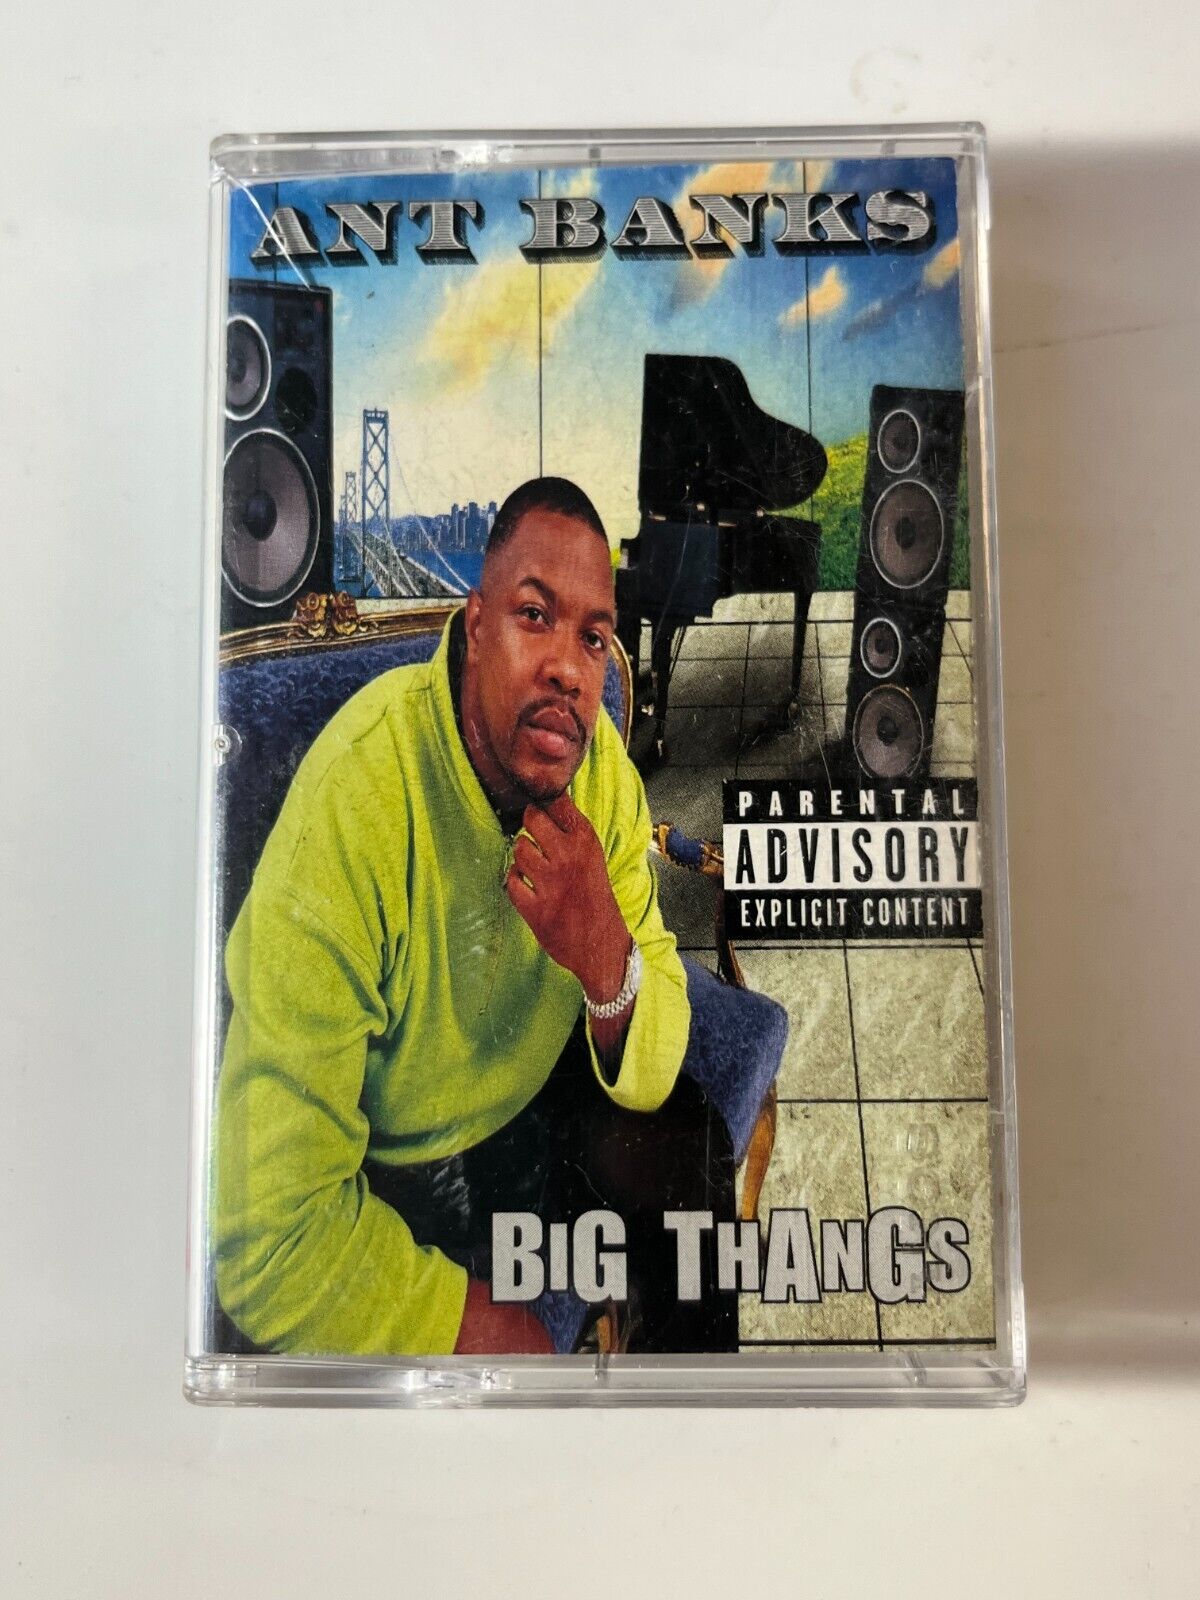 Big Thangs [PA] by Ant Banks (Cassette, Jul-1997, Priority Records)